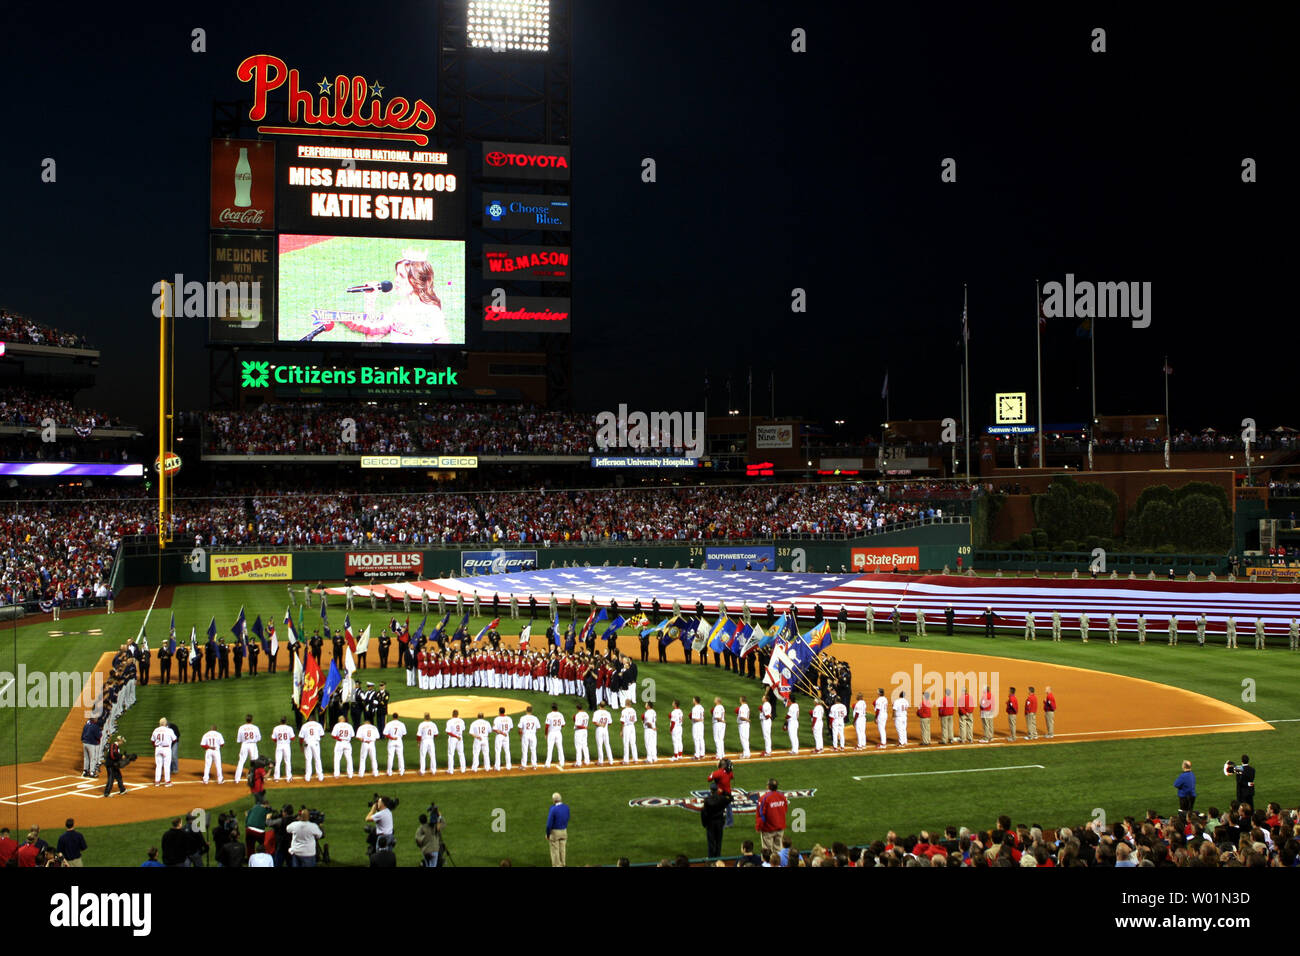 World Series champions Philadelphia Phillies and their opening